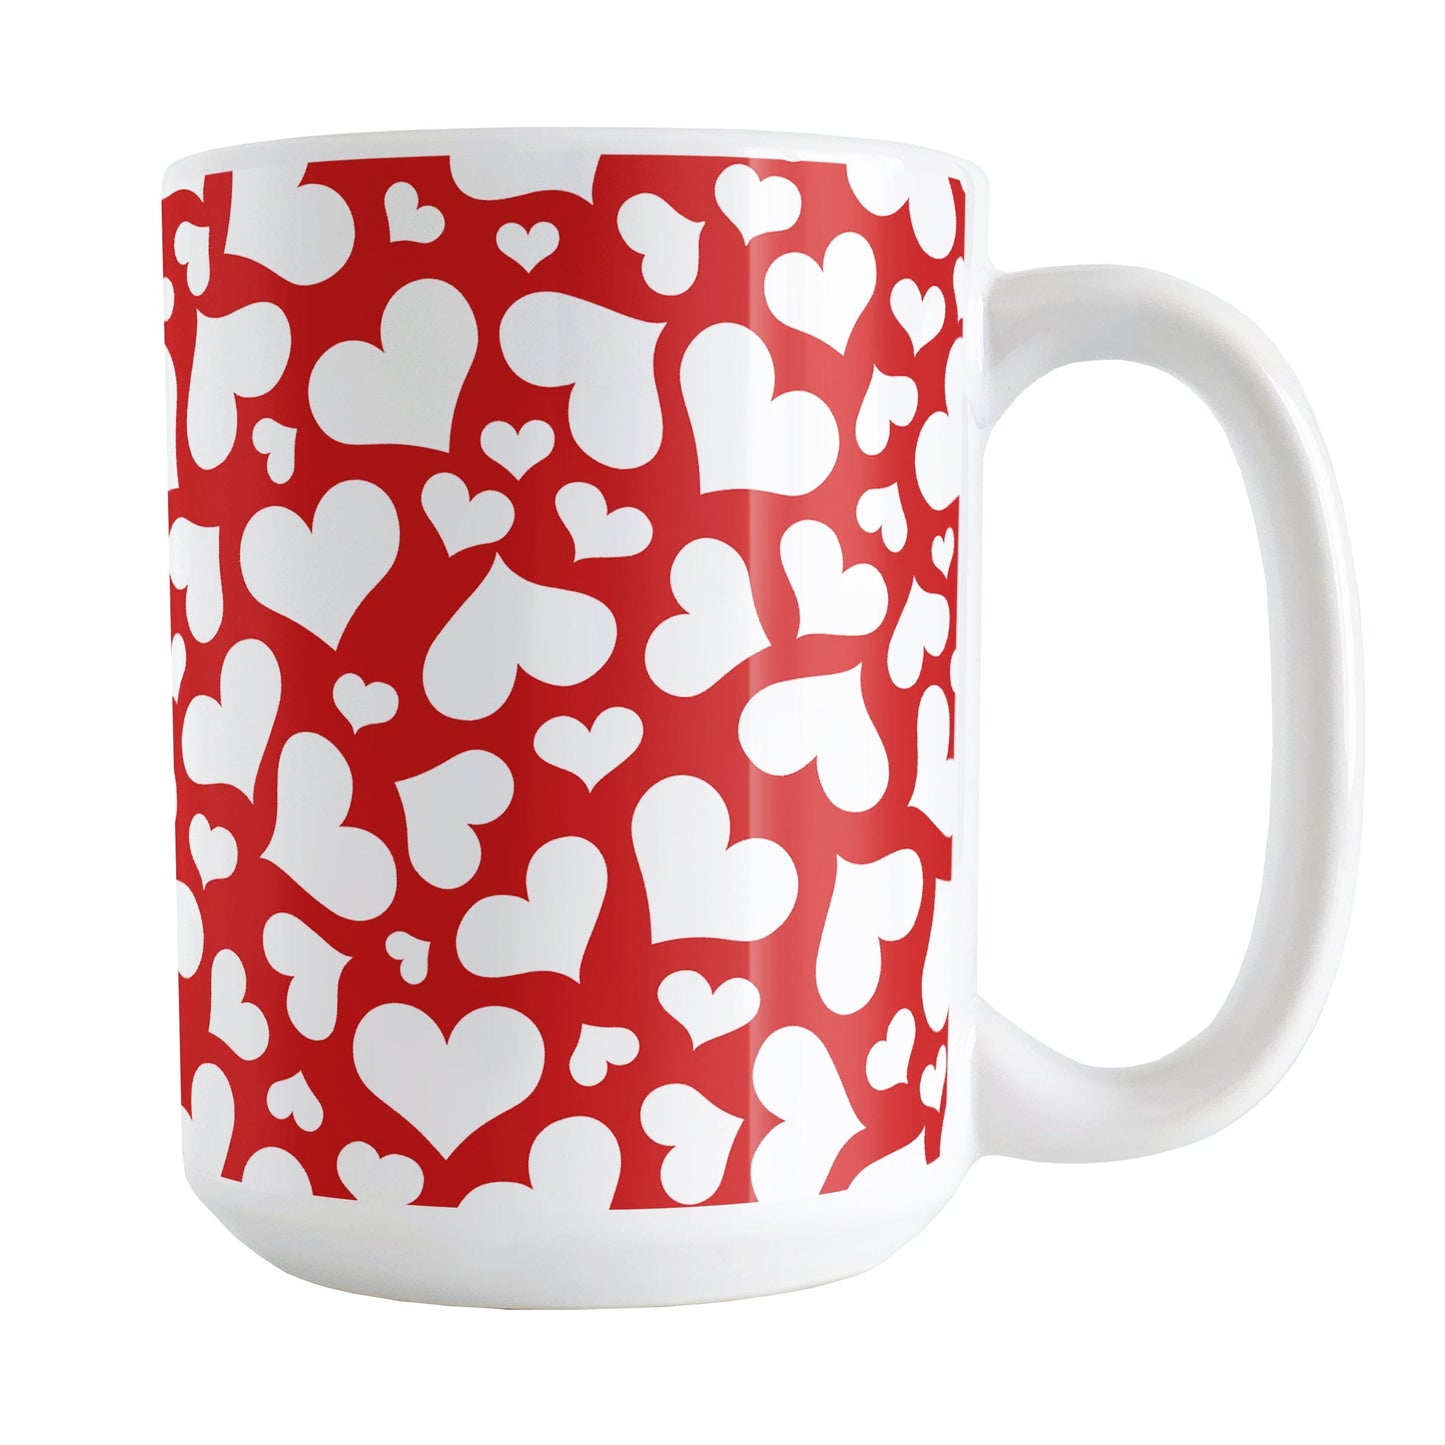 Cute White Hearts on Red Mug (15oz) at Amy's Coffee Mugs. A ceramic coffee mug designed with a multi-directional pattern of cute white hearts over a red background color that wraps around the mug to the handle.